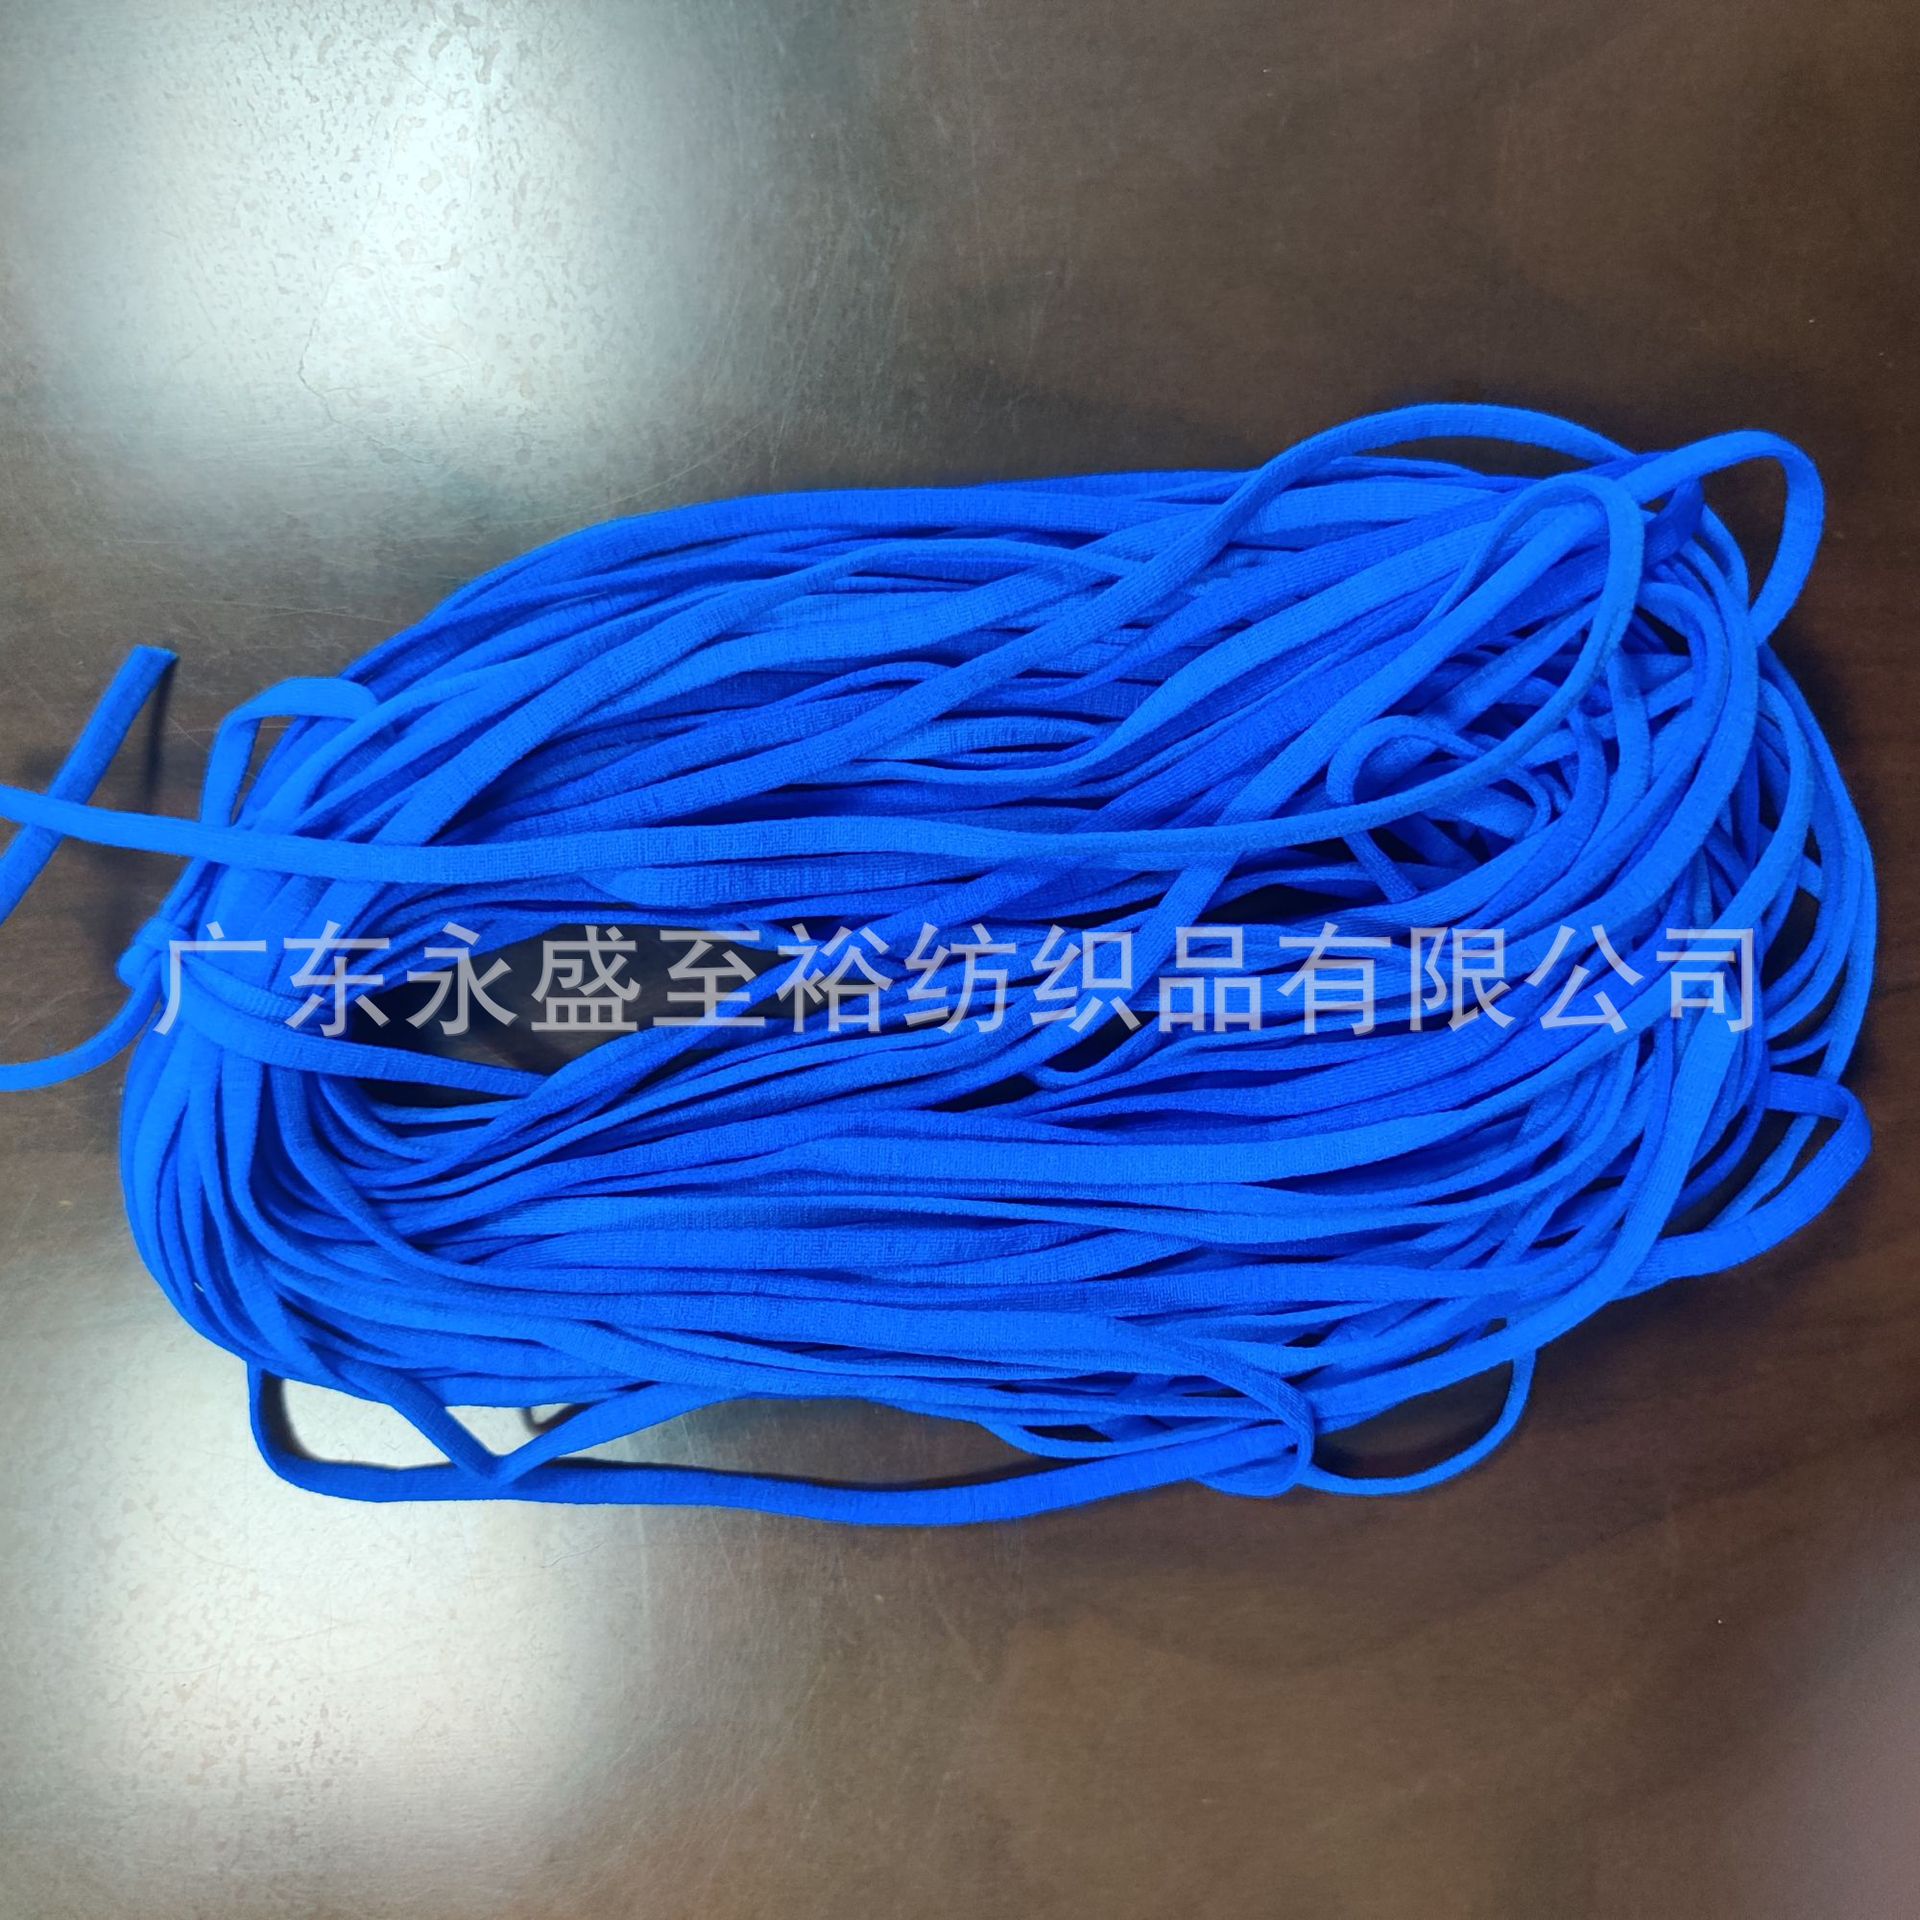 Mask rope 3-5MM Mask elastic band KN95 disposable Mask With ear black and white colour Manufactor Direct selling